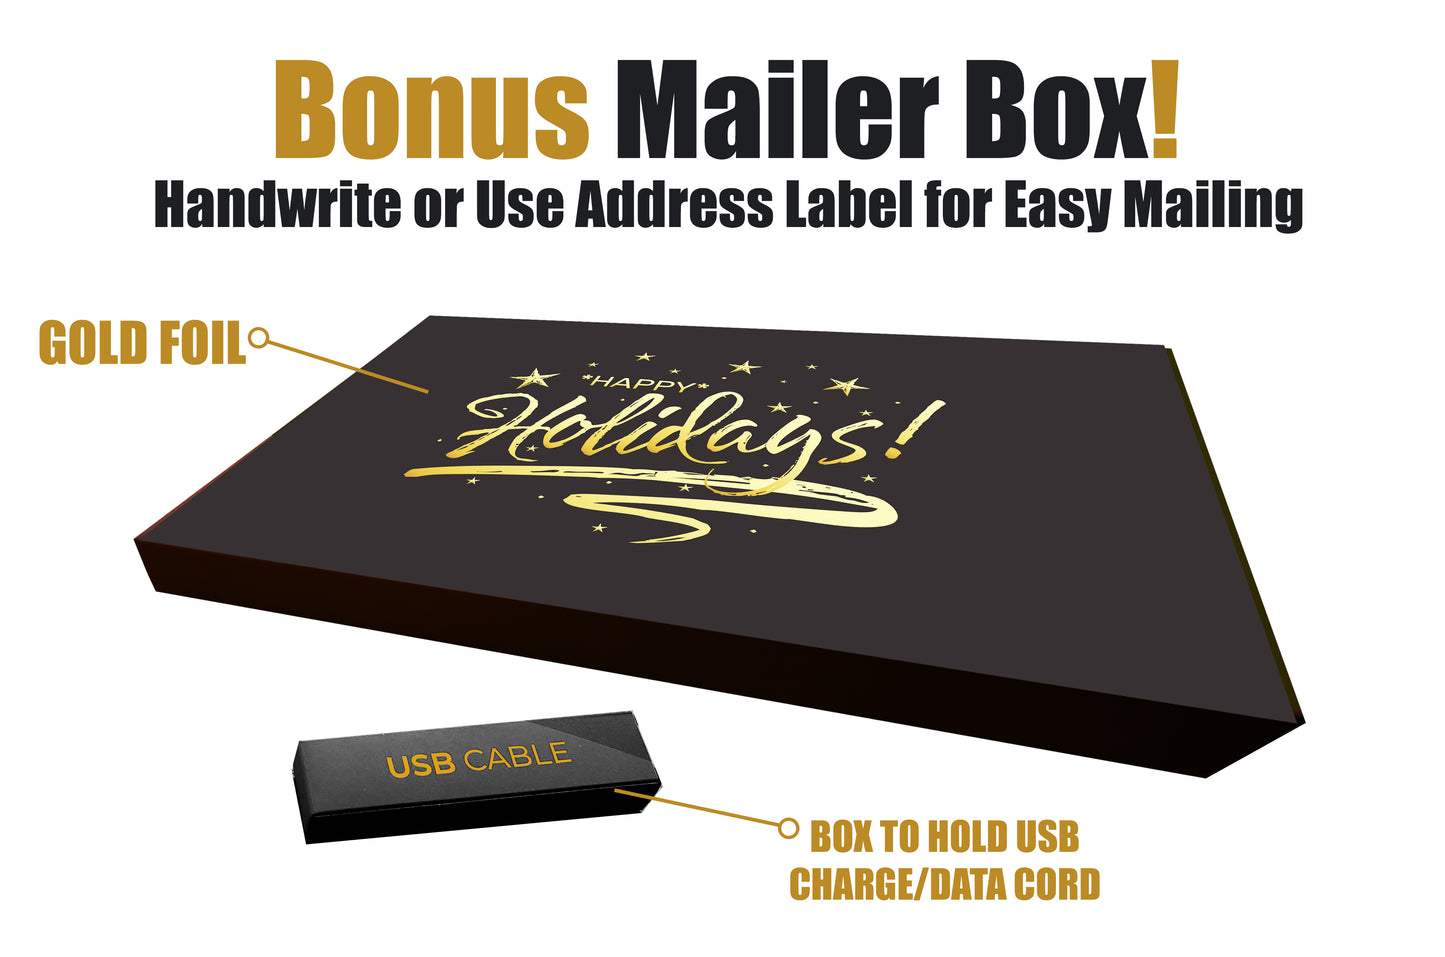 Holiday Video Card Mailer | 7" HD Video Screen | Gold Foil | Easily Upload Videos | FREE Mailer Box! | Free Shipping!